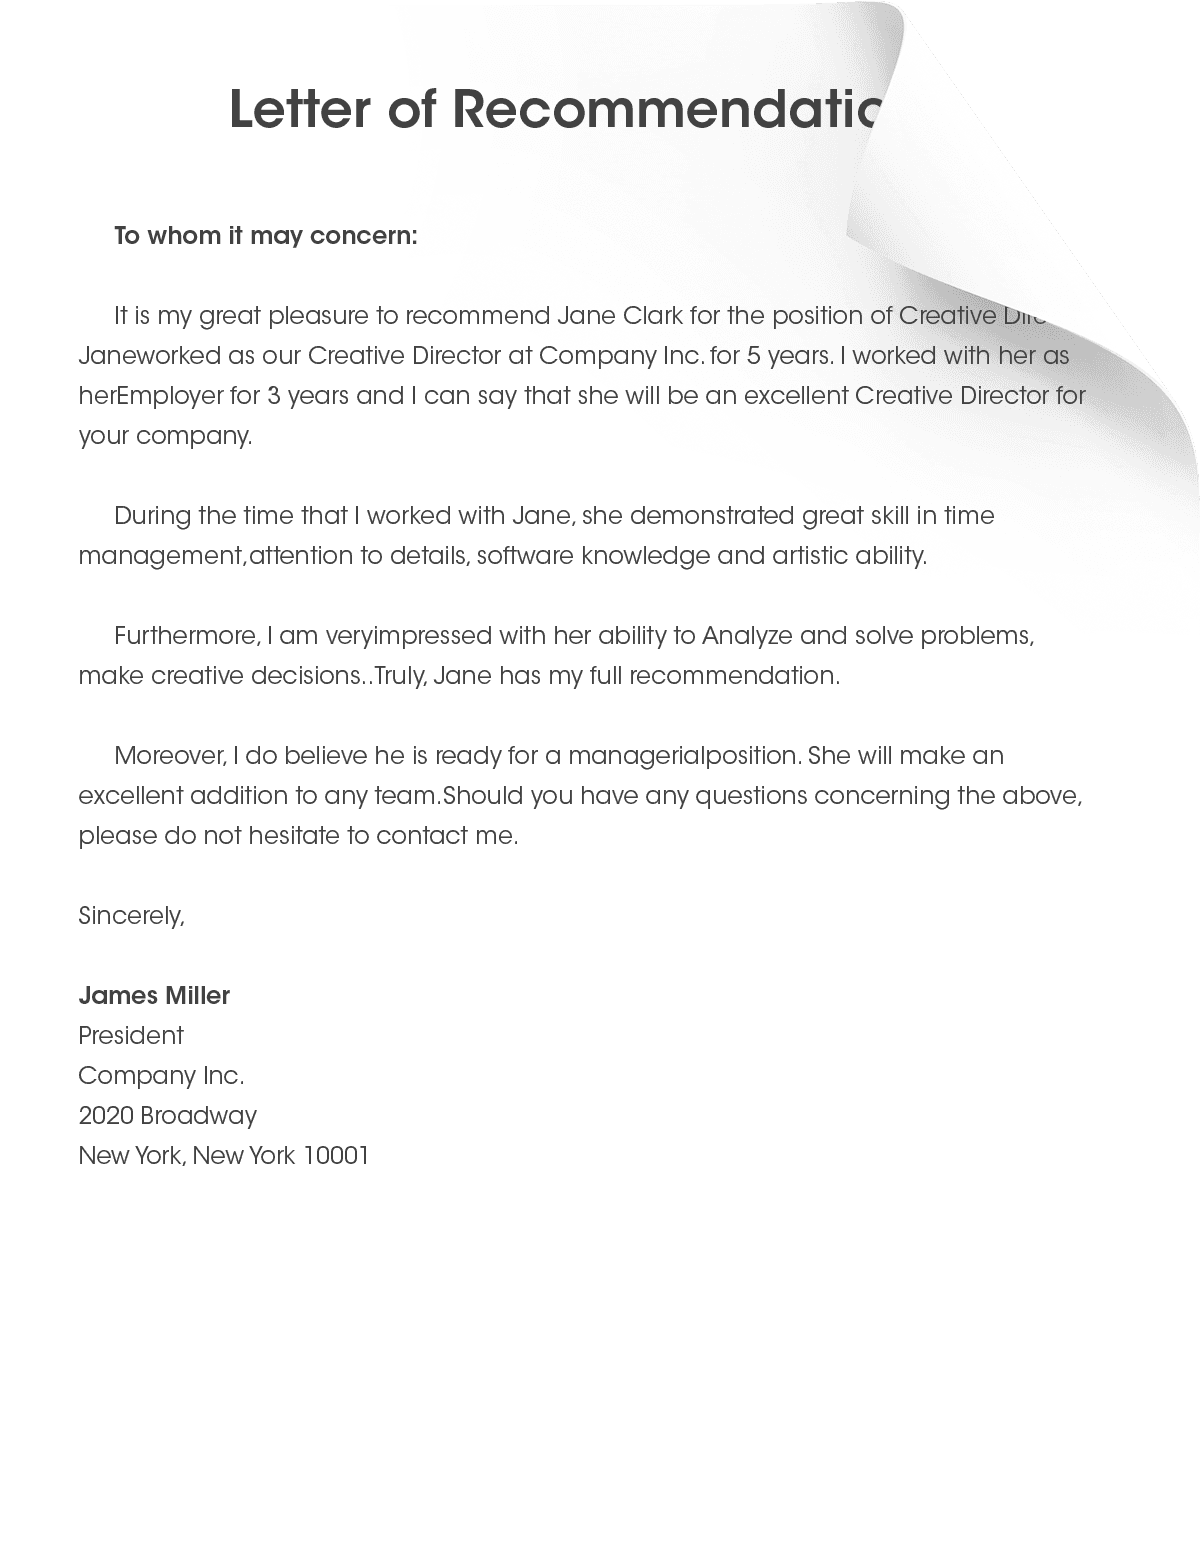 Letter Of Recommendation For A Company from s30311.pcdn.co